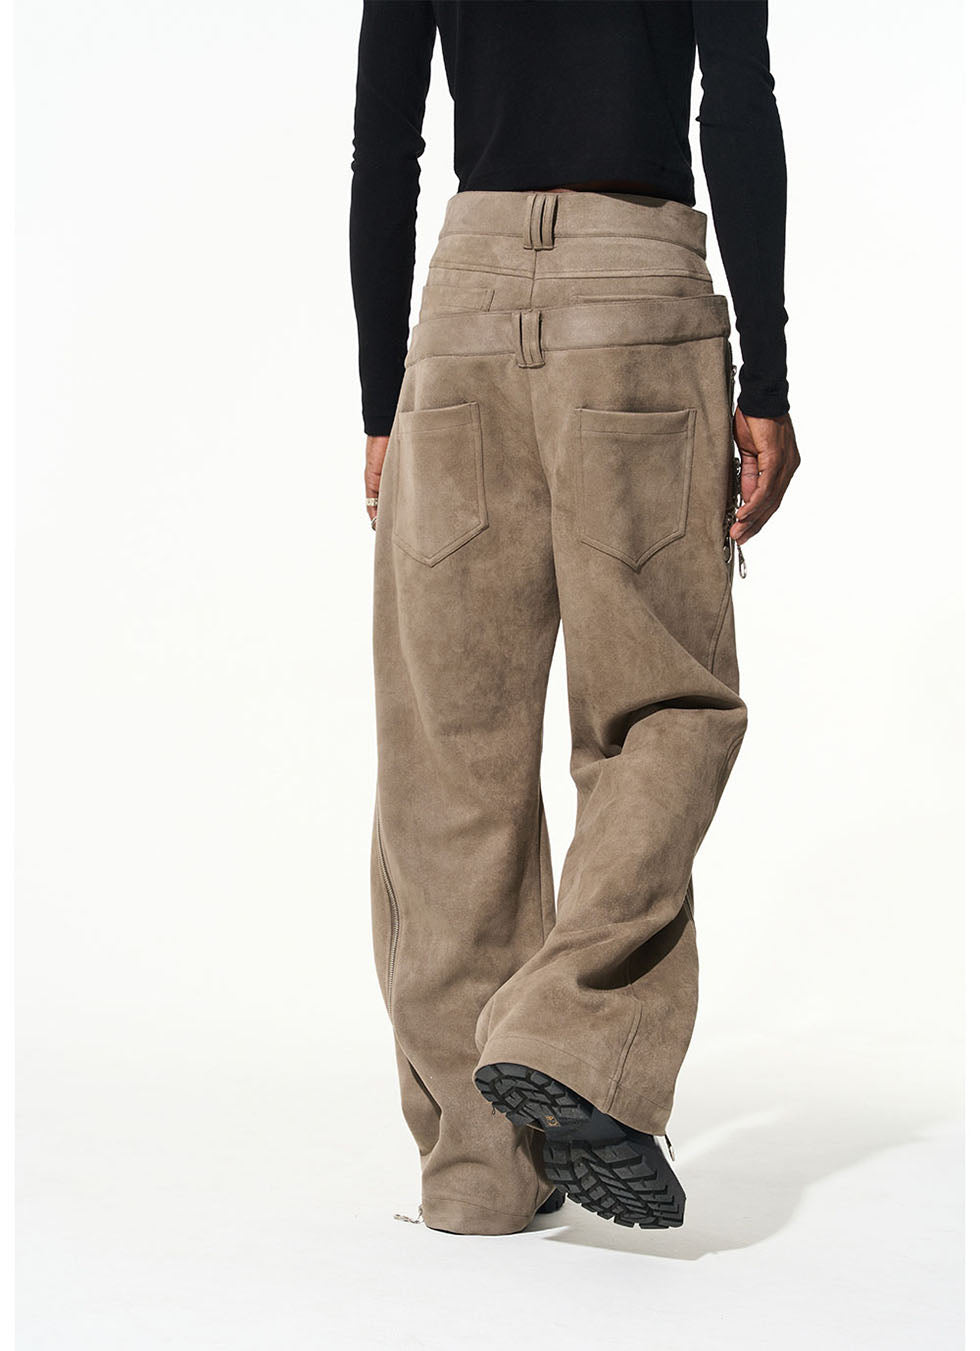 Suede Cut Staggered Double Waist Multi Zipper Casual Pants 